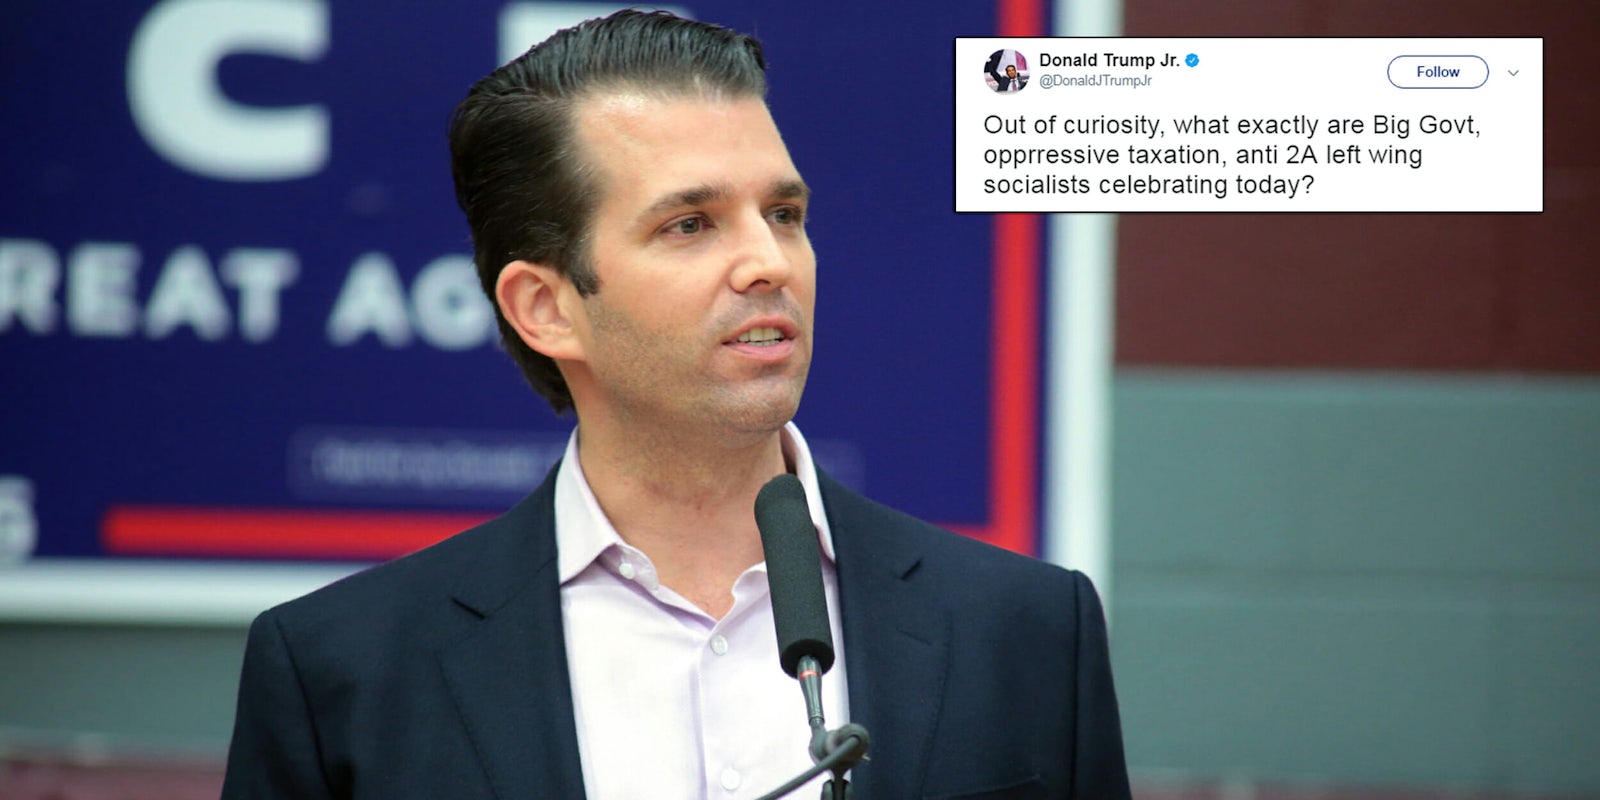 Donald Trump Jr. tweeted on July 4th